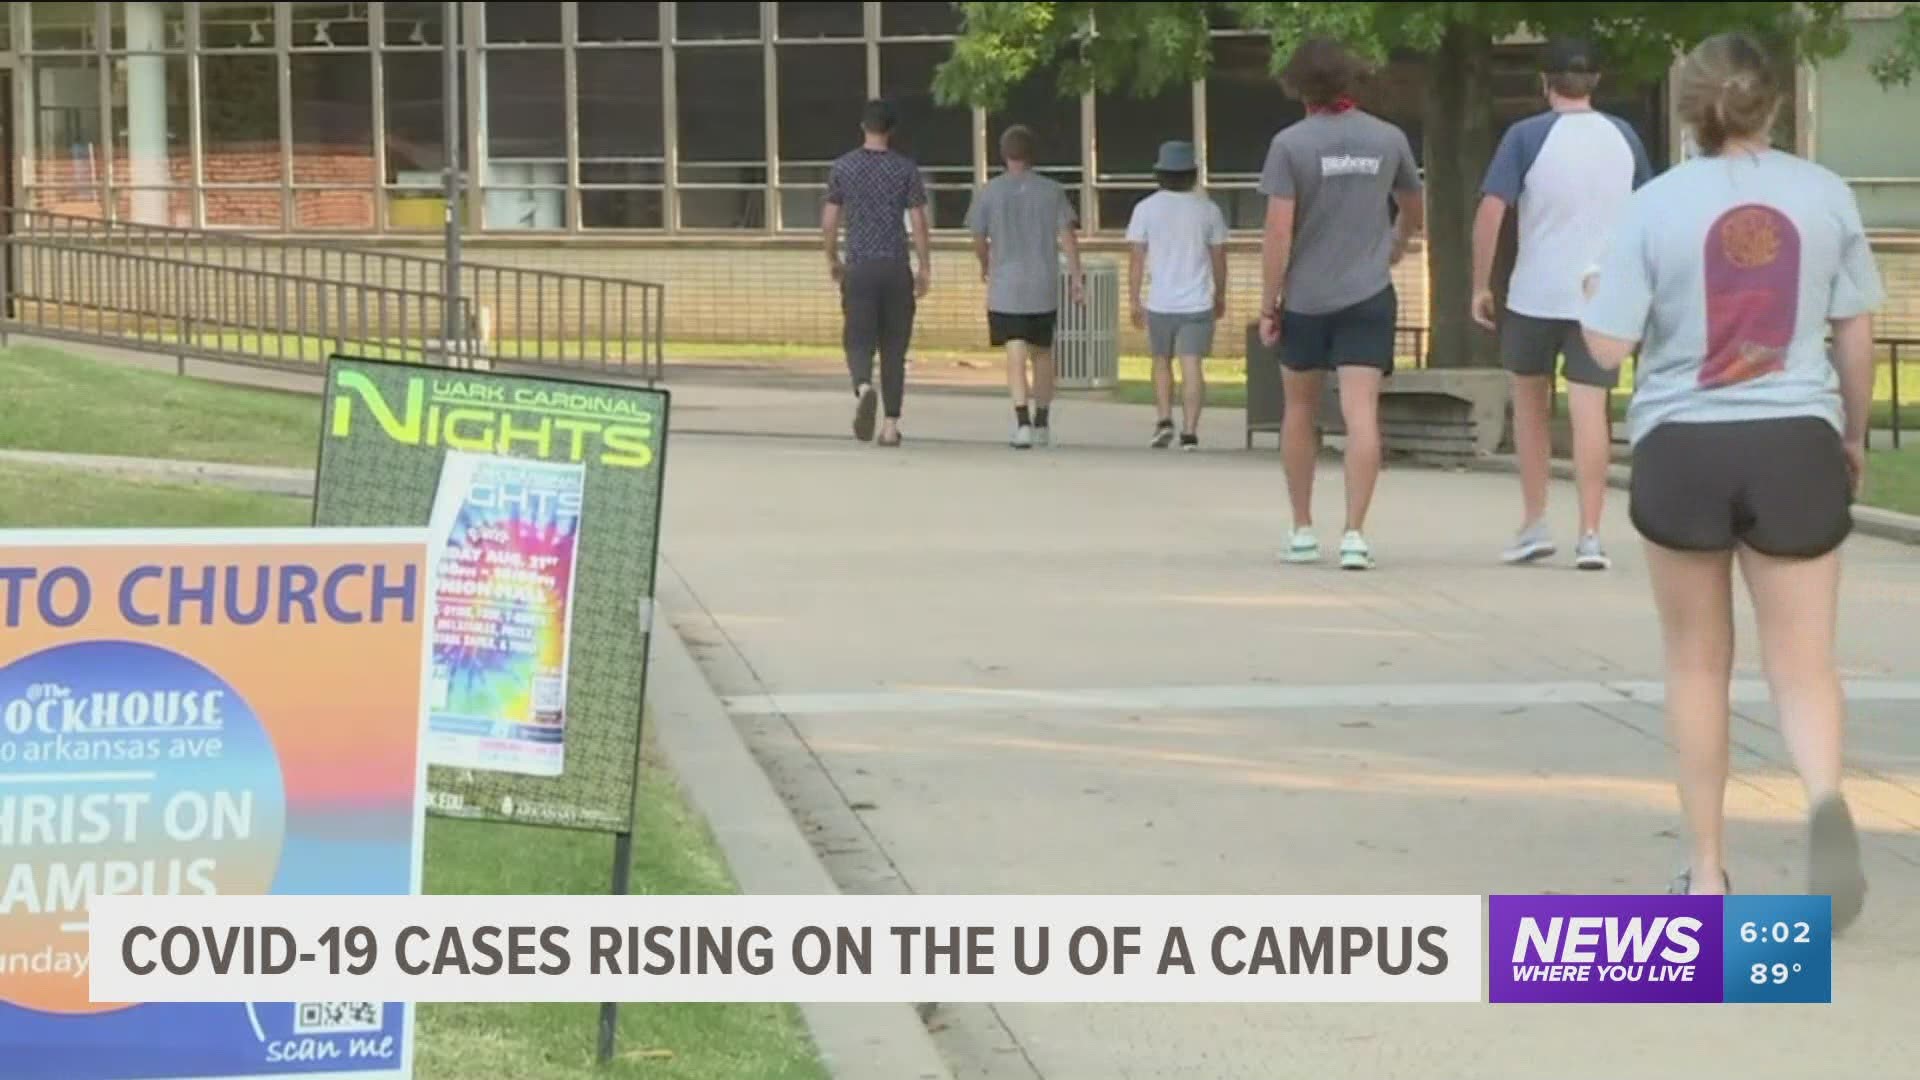 The University of Arkansas is banning all gatherings of 10 or more on and off-campus due to the COVID-19 pandemic. https://bit.ly/2Gw6GVE